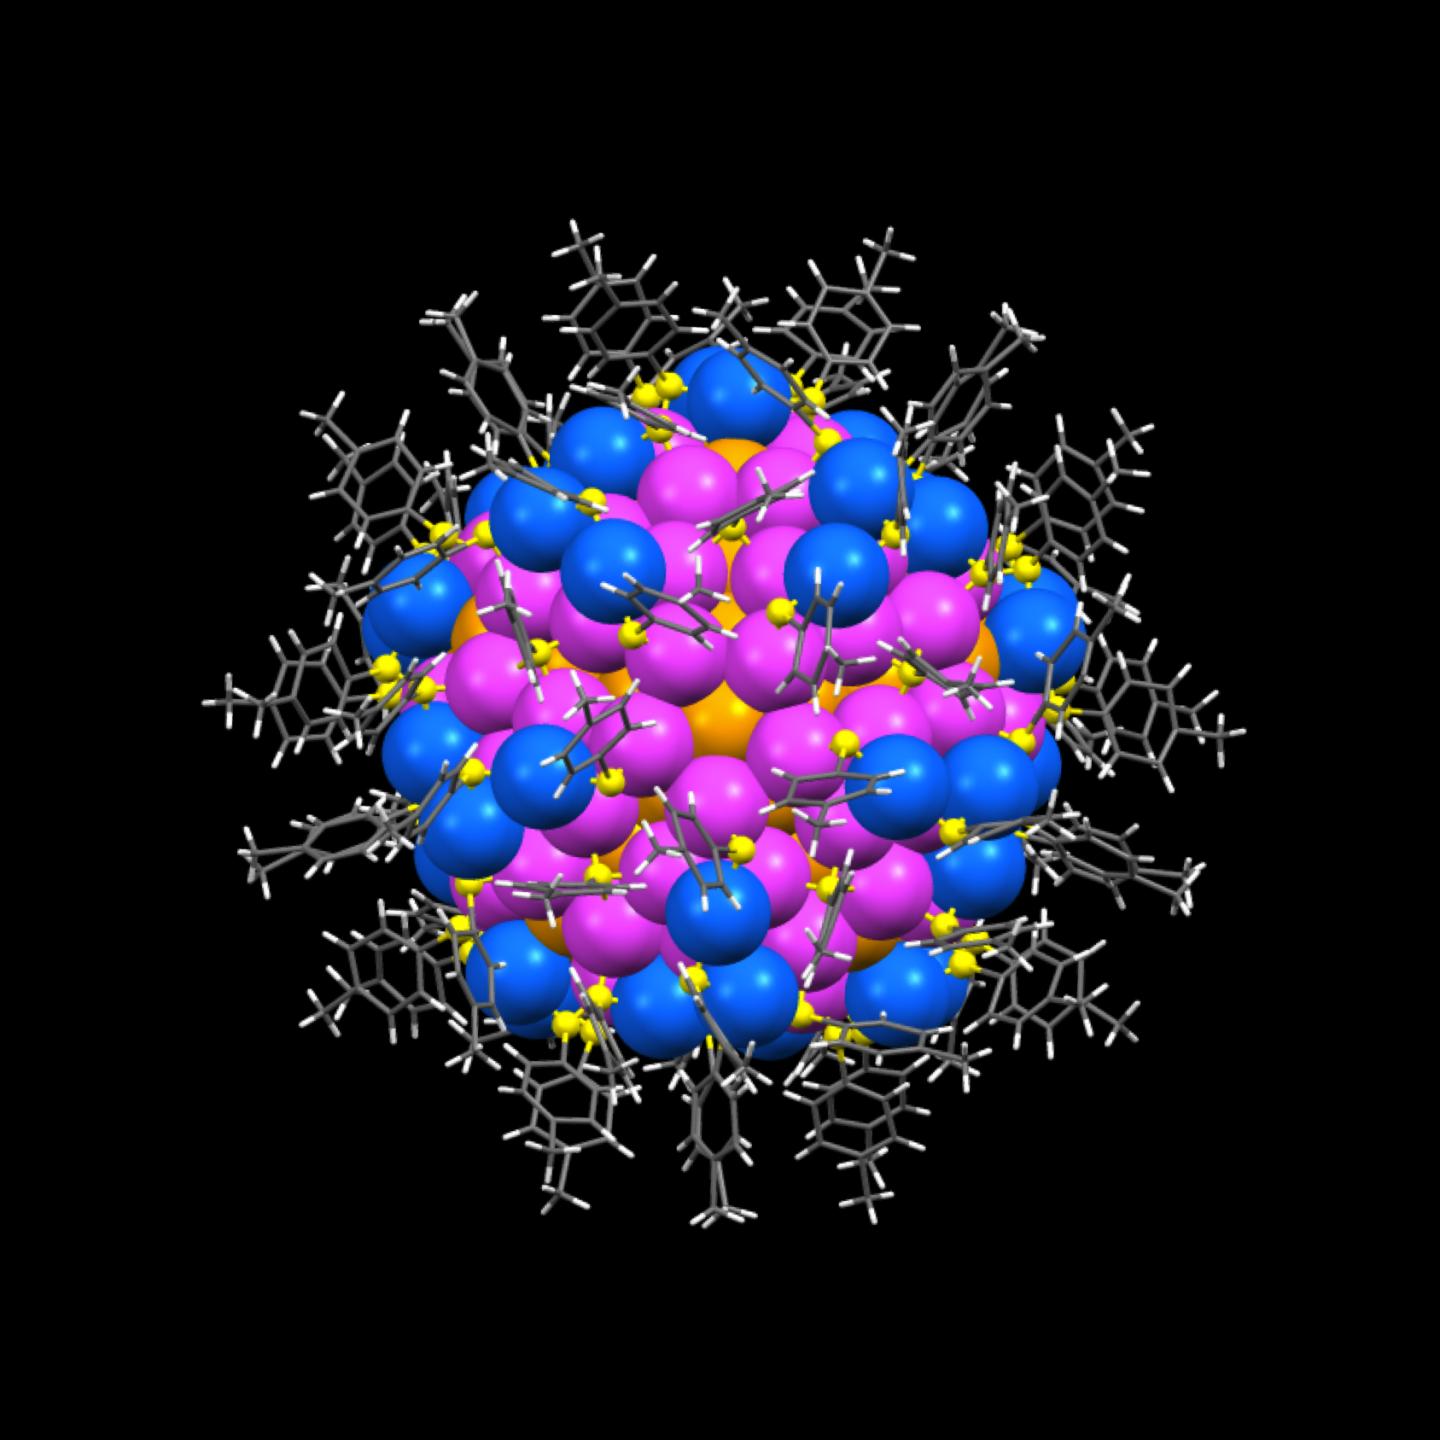 Structure of Au246 Nanoparticle